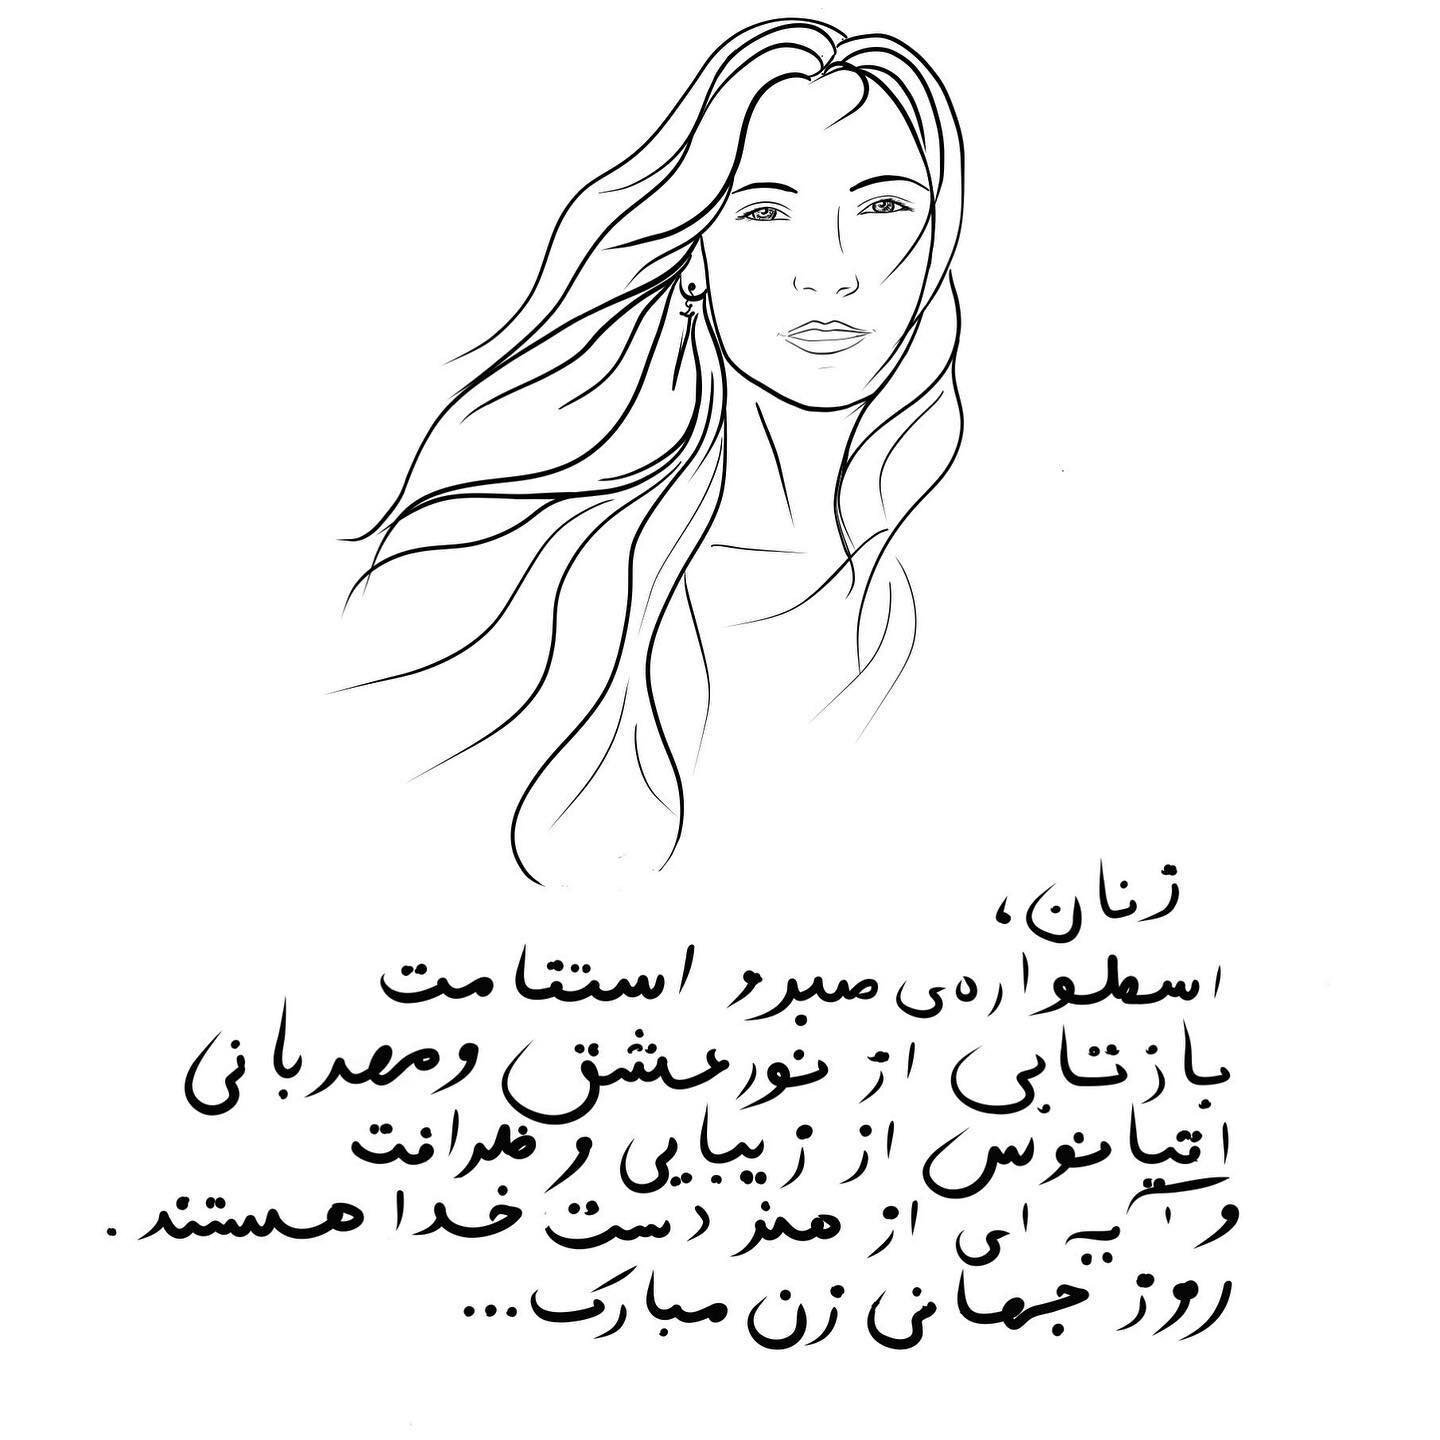 ➖women&rsquo;s day reflection 🌏

 Women:
:
The essence of patience and perseverance 
:
A reflection of light, love, and kindness 
:
-Women are a verse of art in 
  the hand of God

▫️Poem by Razia📝📍
 
#womensday #woman #womensrights #afghannews #a